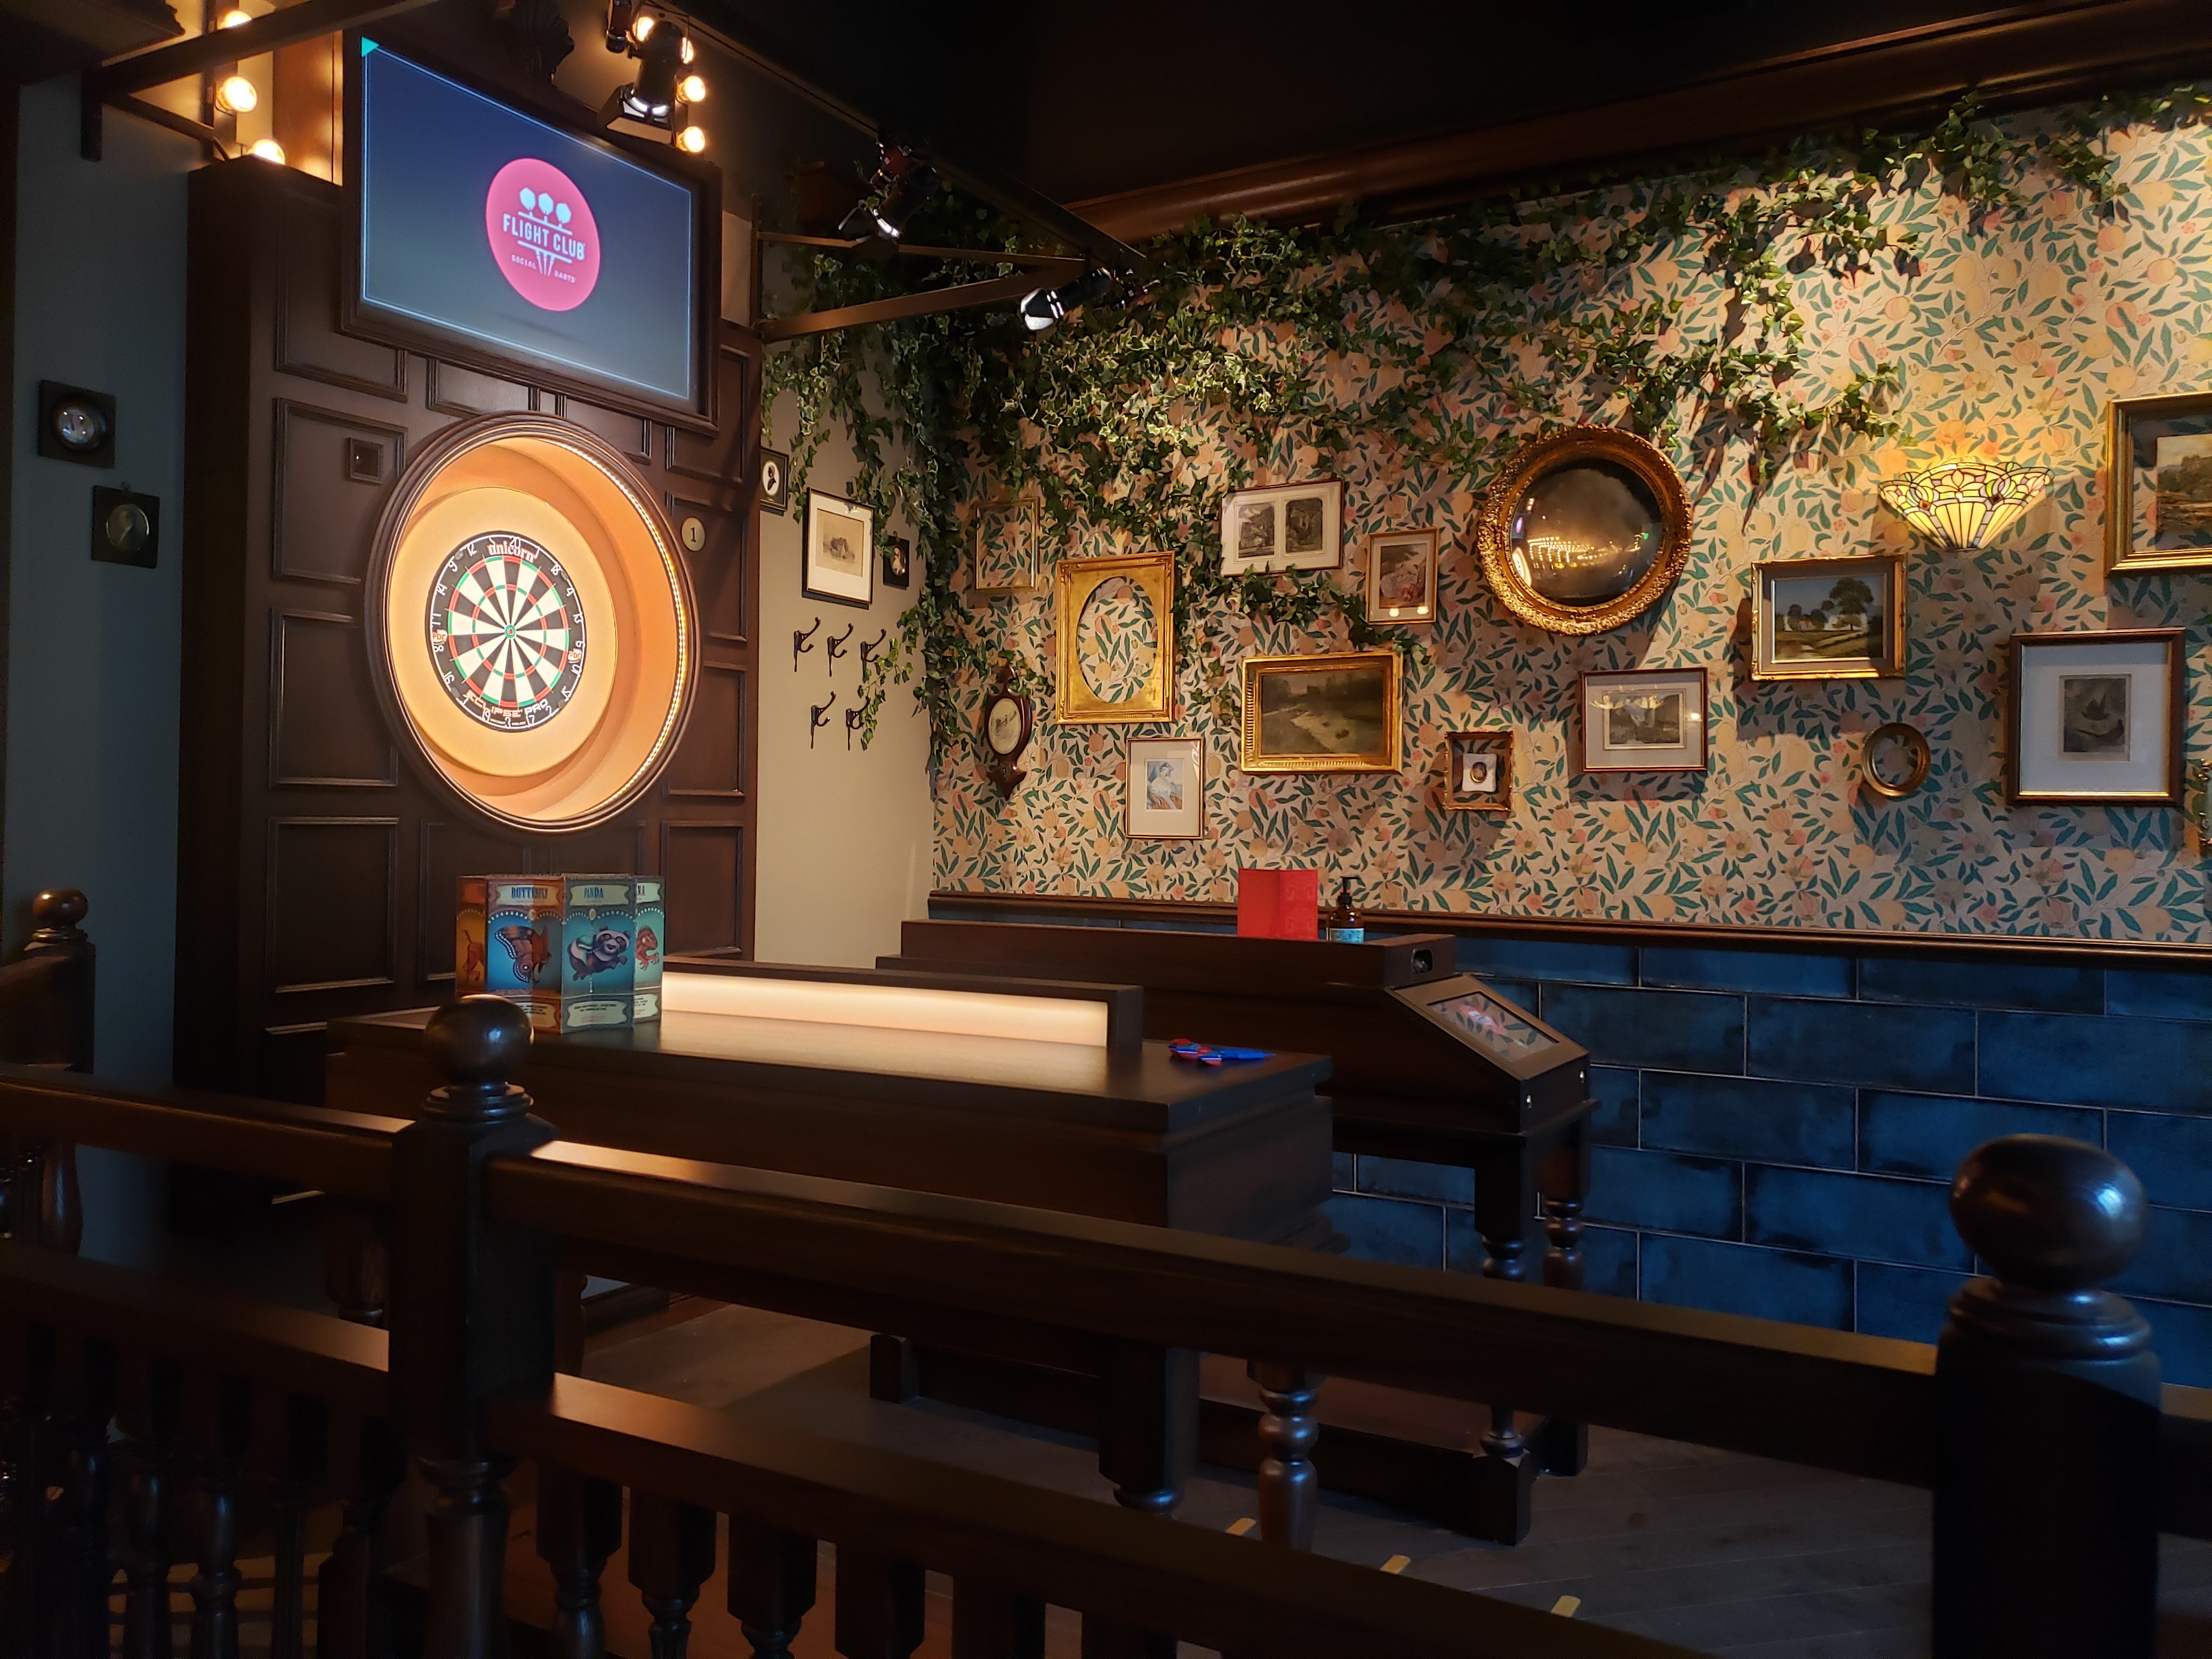 Flight Club, a high-tech darts bar, just opened in the Seaport